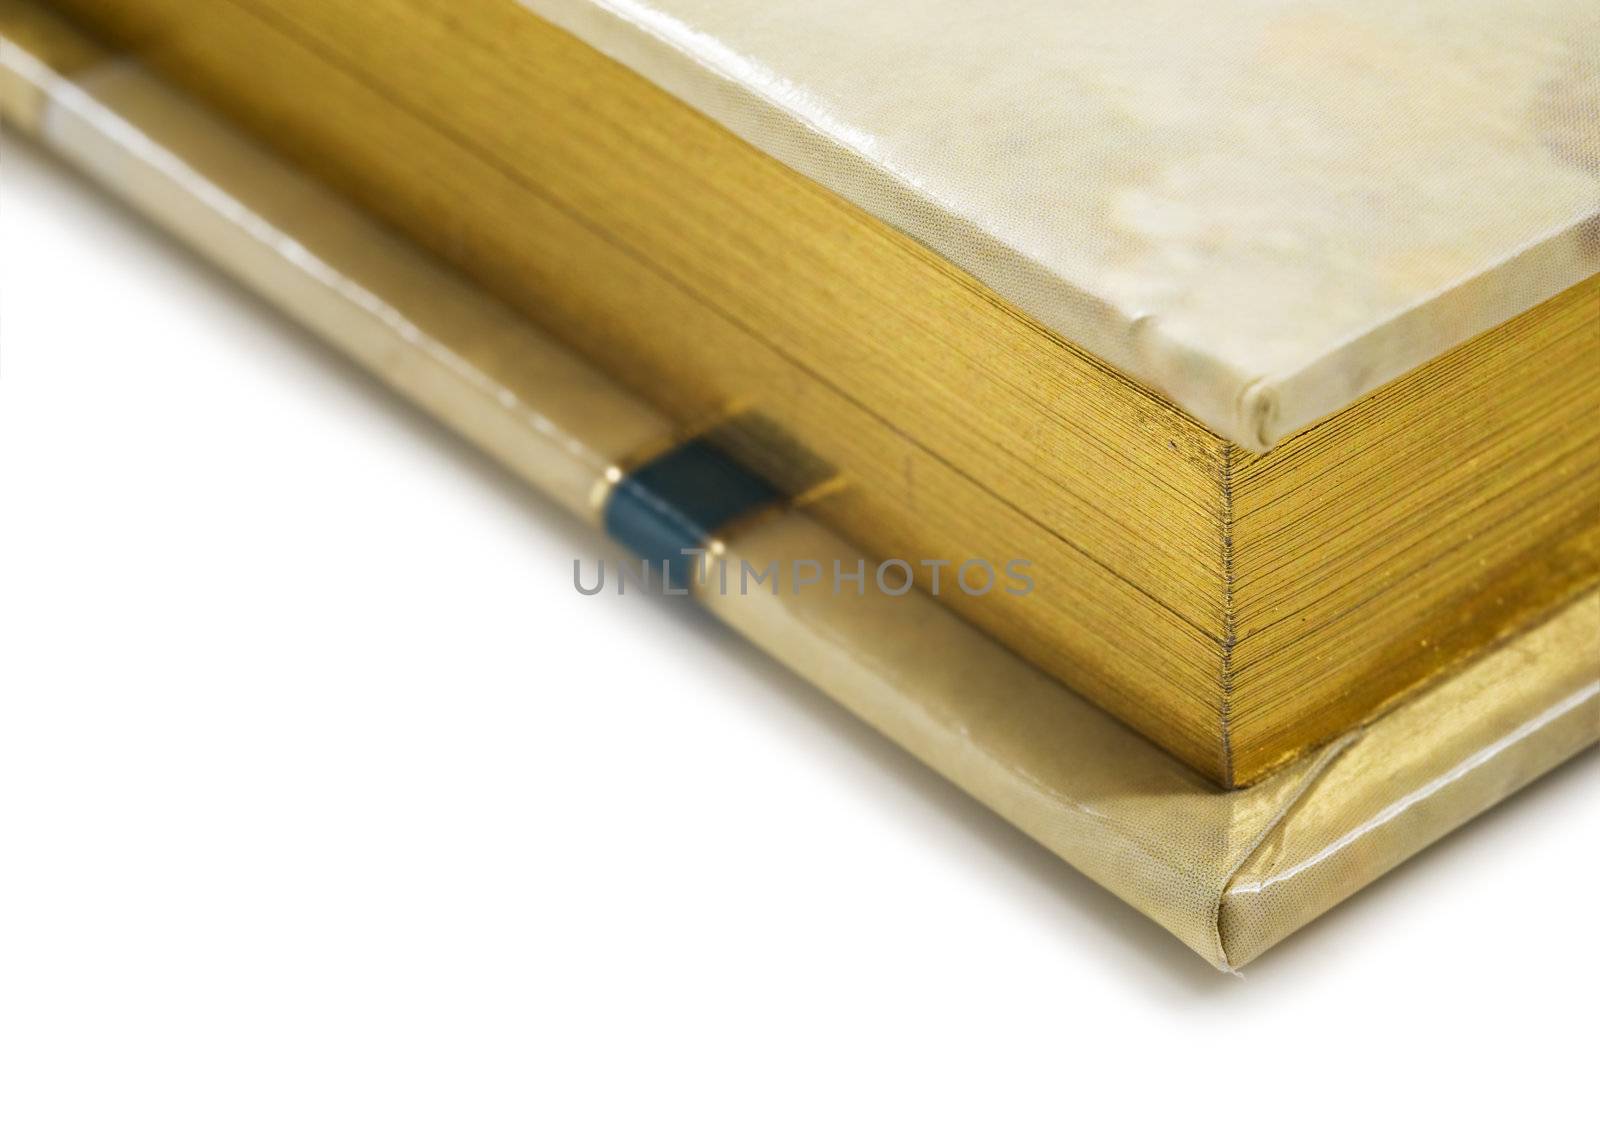 Close up of a golden colored journal